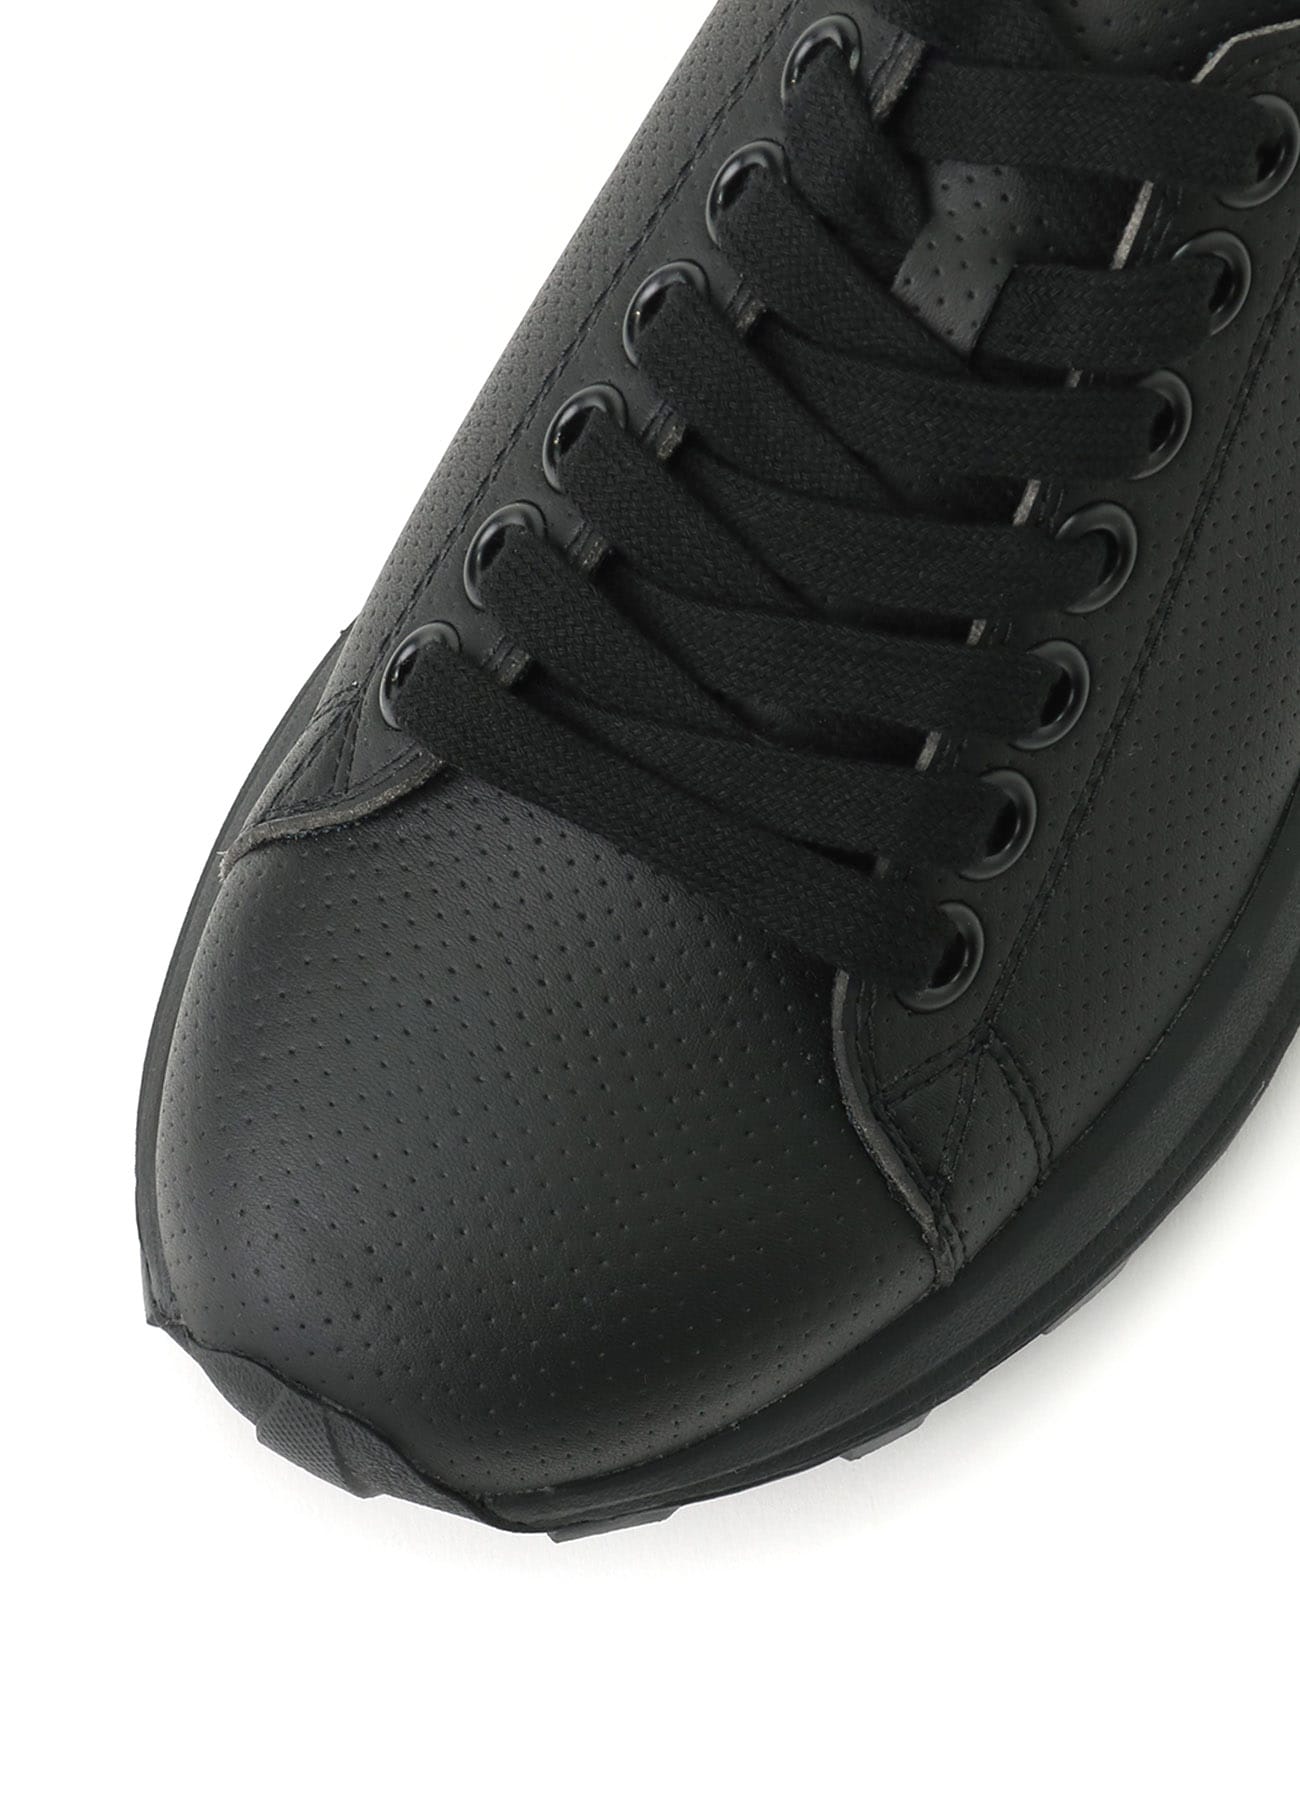 PU/PUNCHING LOW TOP LACE UP SHOES